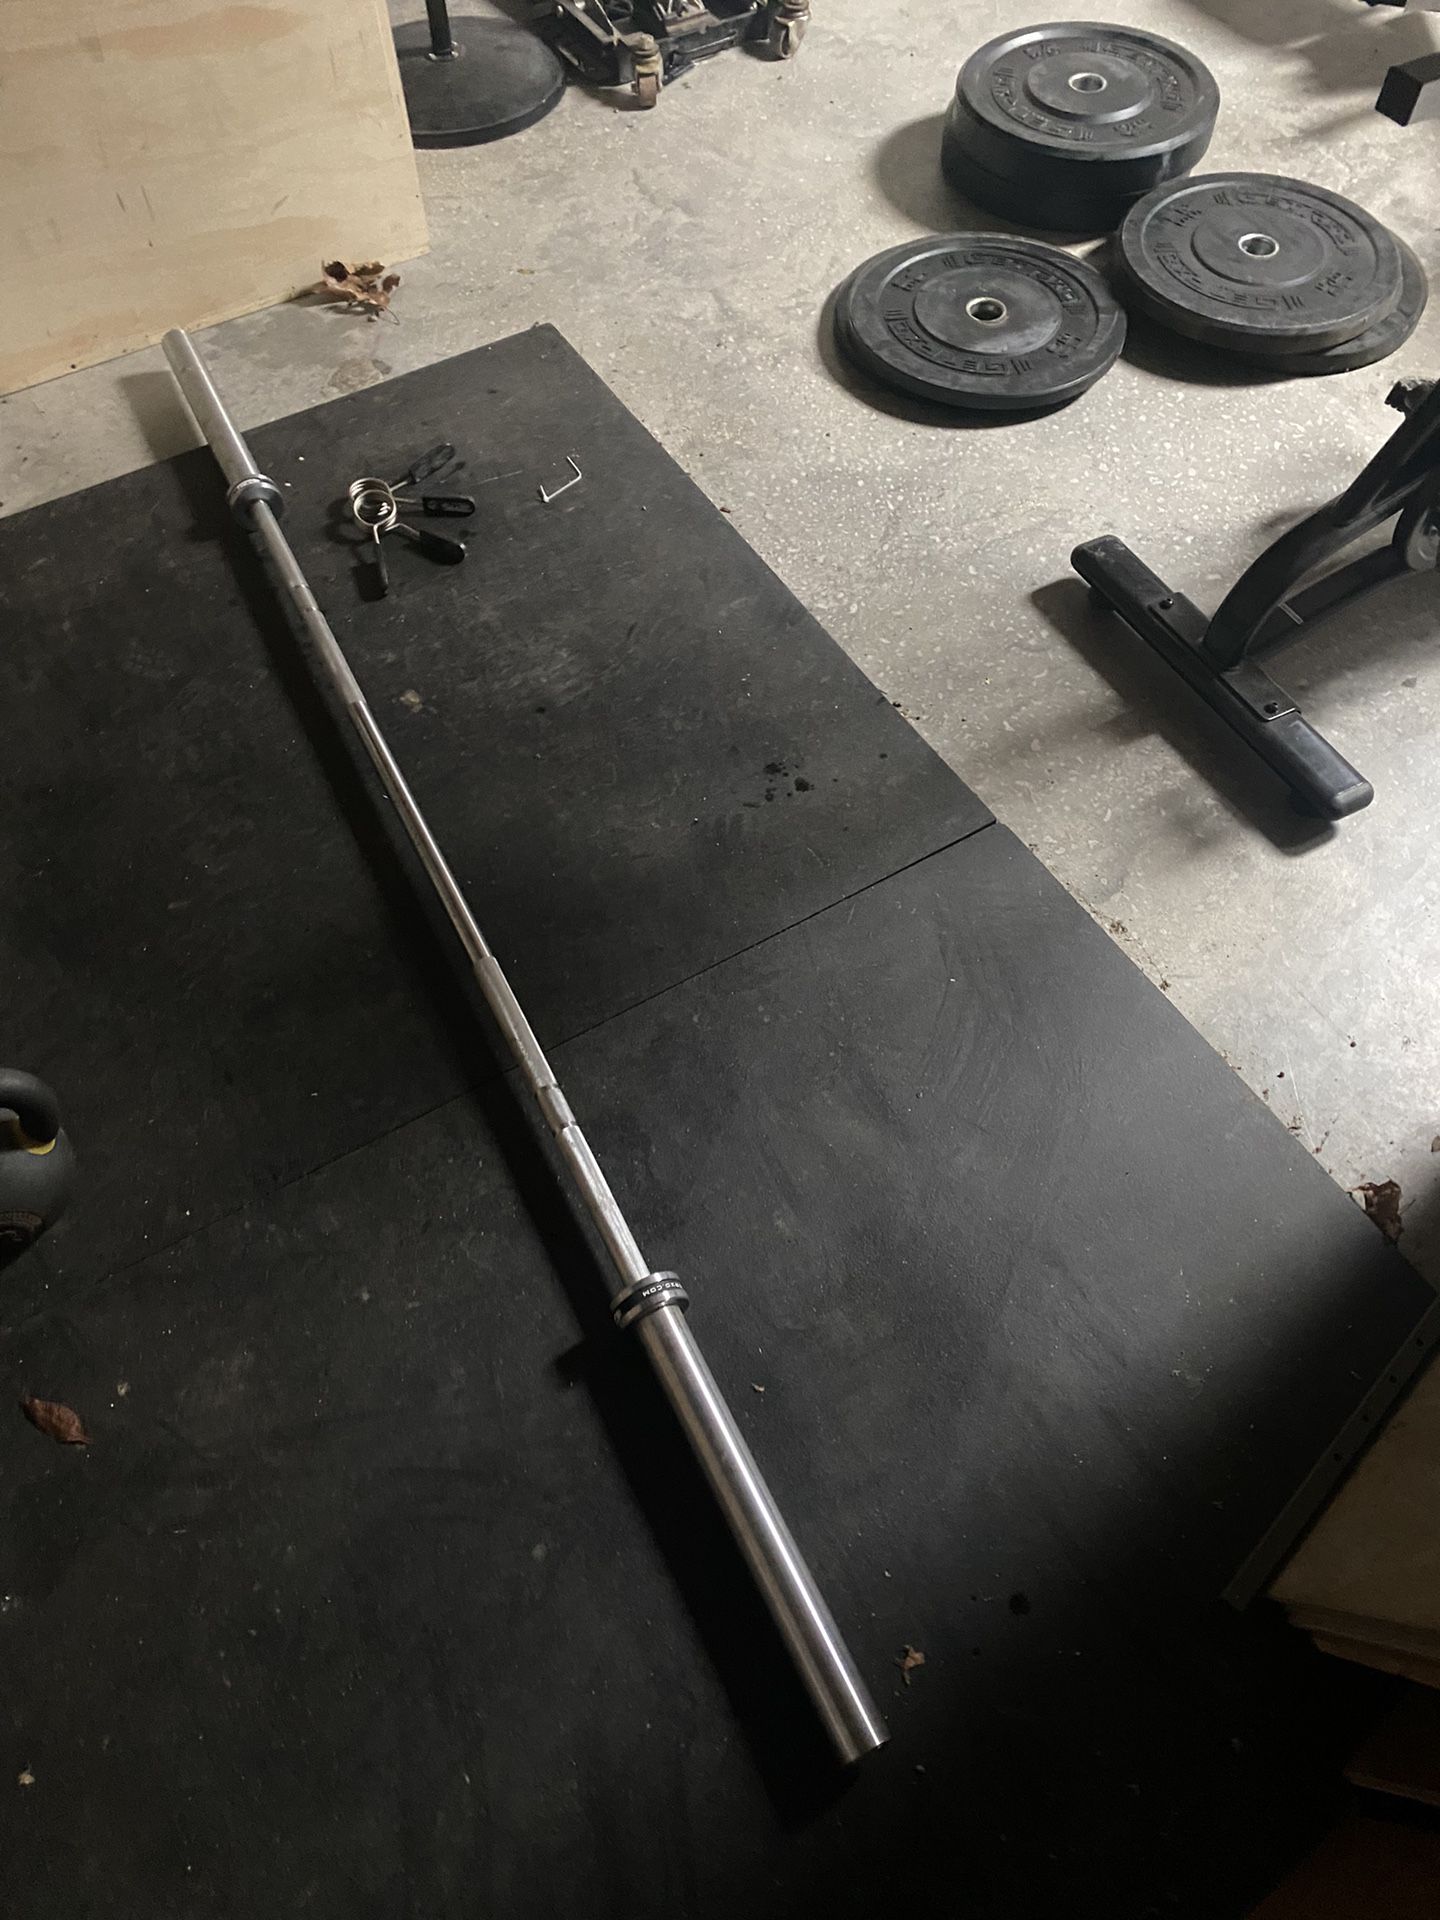 Get RX’d Barbell + Plates